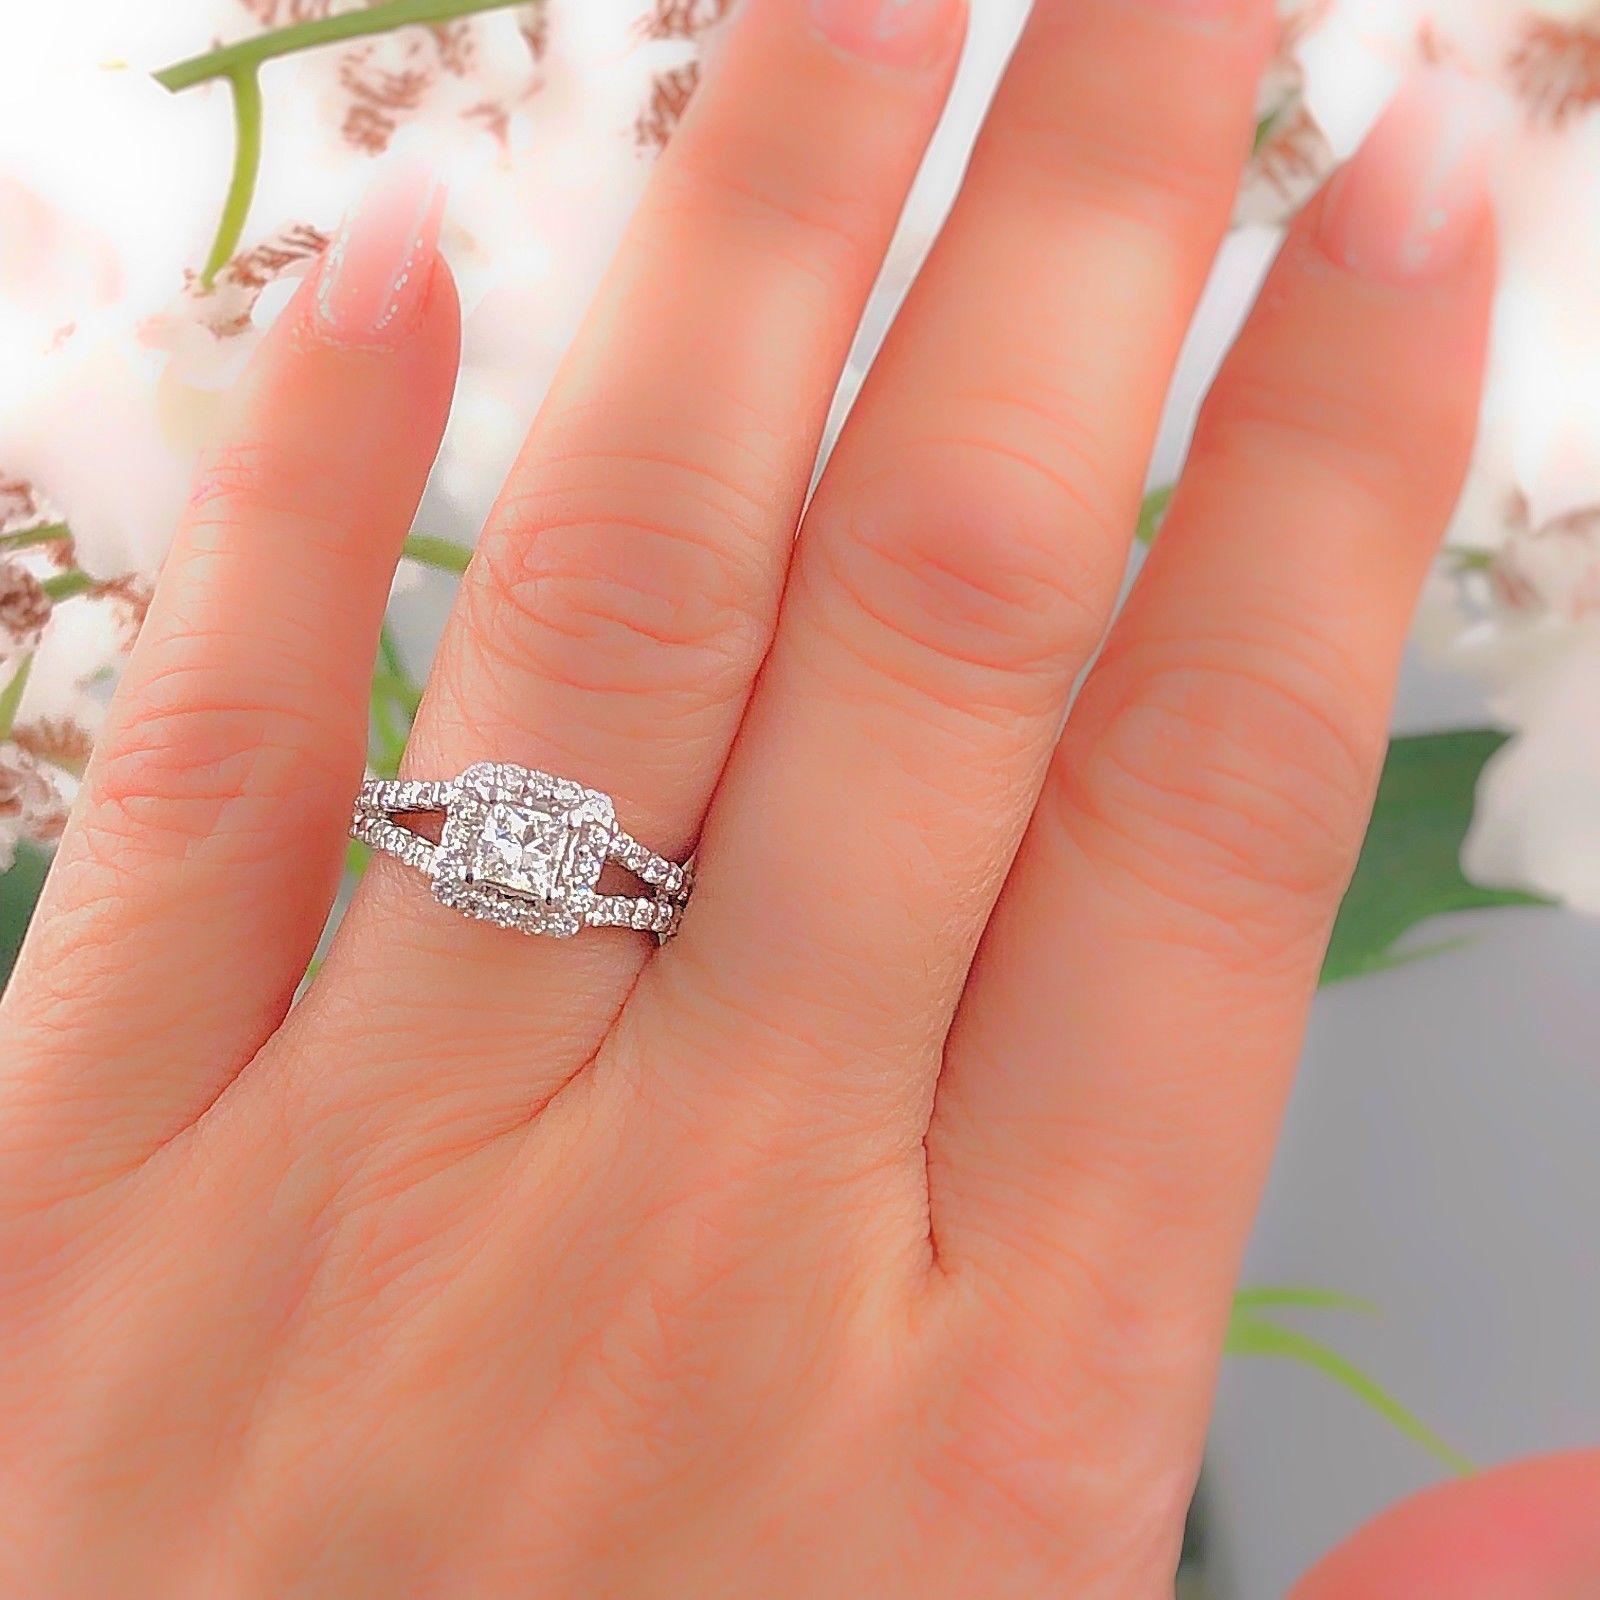 HDS - Helzberg Diamonds
Style:  Halo Diamond Engagement Ring
Certificate Number:  GIA 2131424531 for Center Princess Cut Diamond
Metal:  18K White Gold
Size:  5.25- sizable
Total Carat Weight:  1.00 TCW
Center Diamond Shape:   0.42 cts
Diamond Color